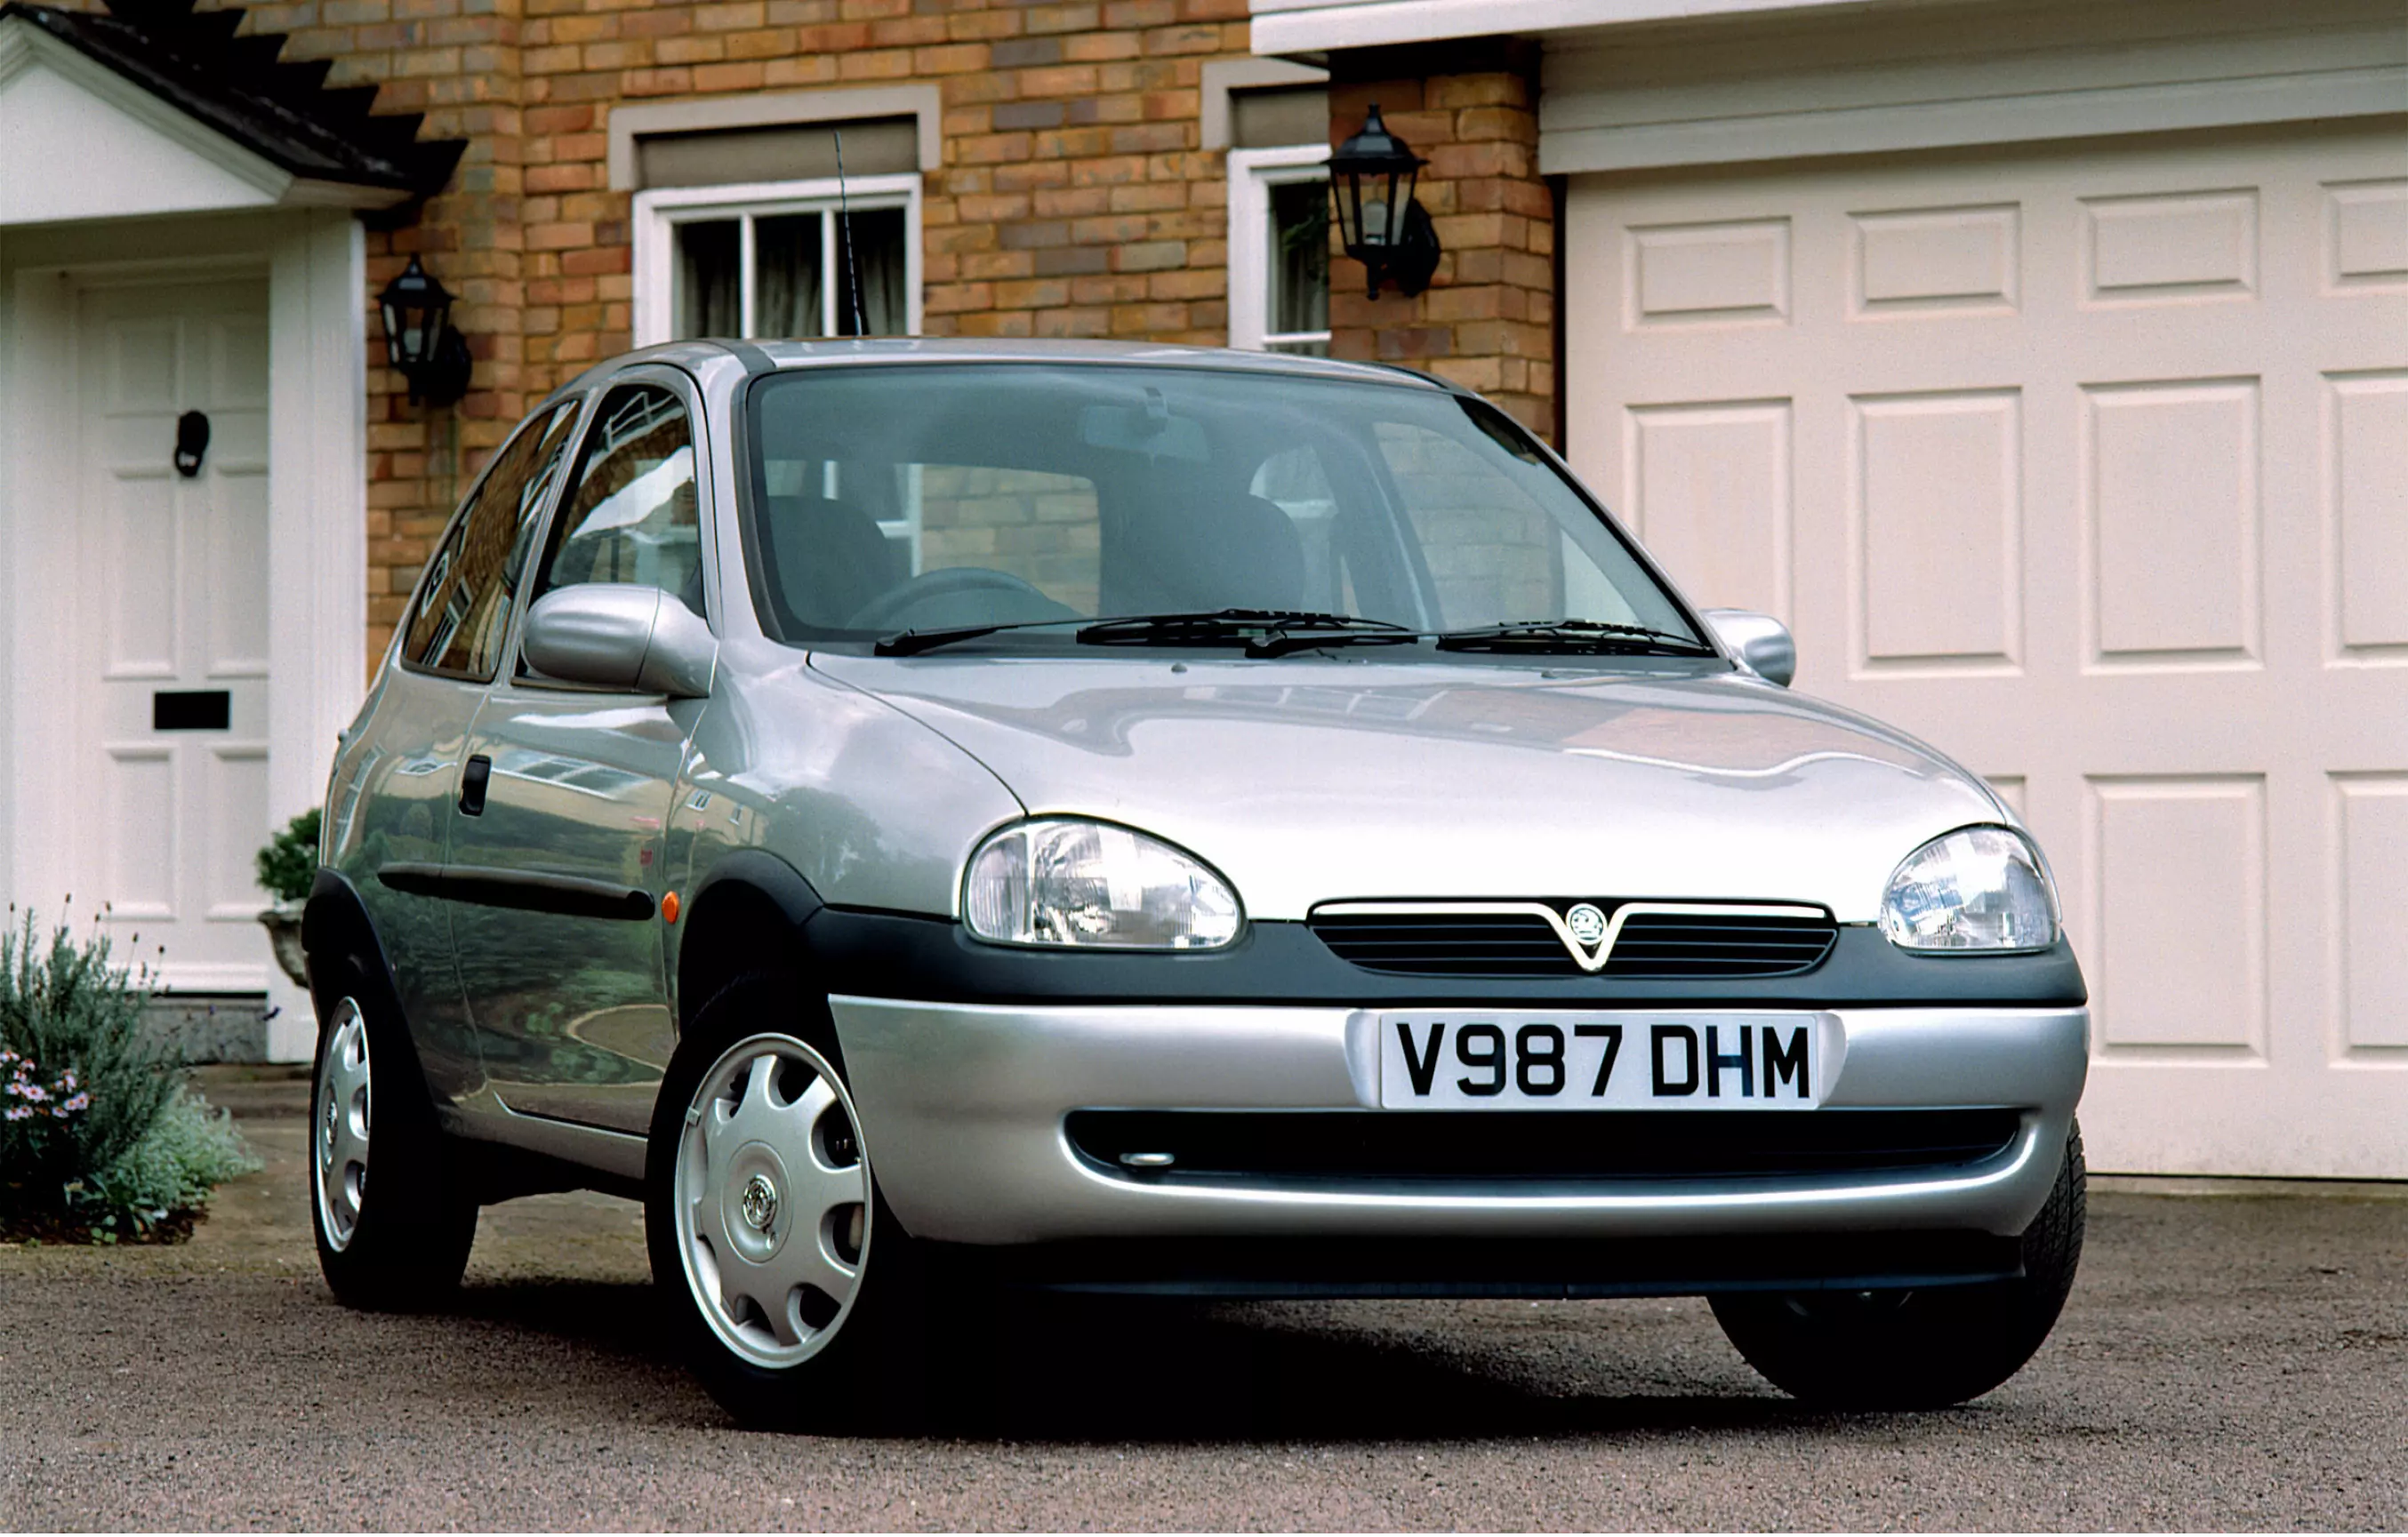 A spotter's guide to the Vauxhall Corsa